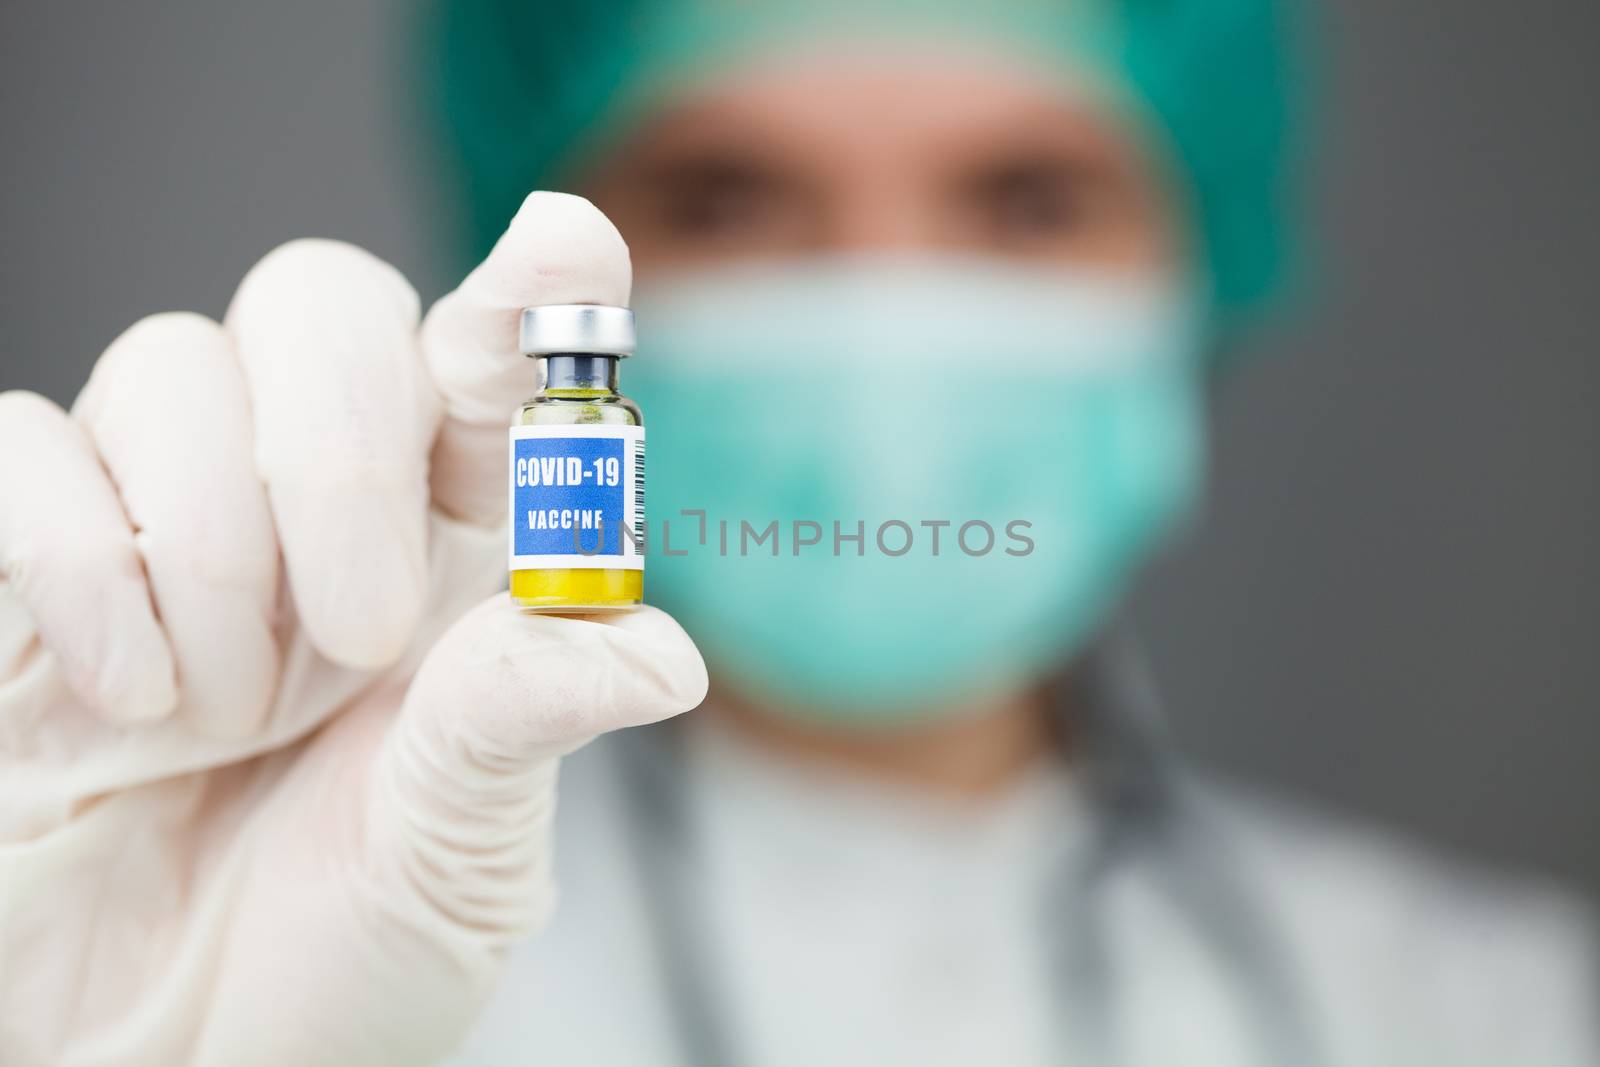 Scientist or doctor holding a vaccine ampoule injection by Plyushkin